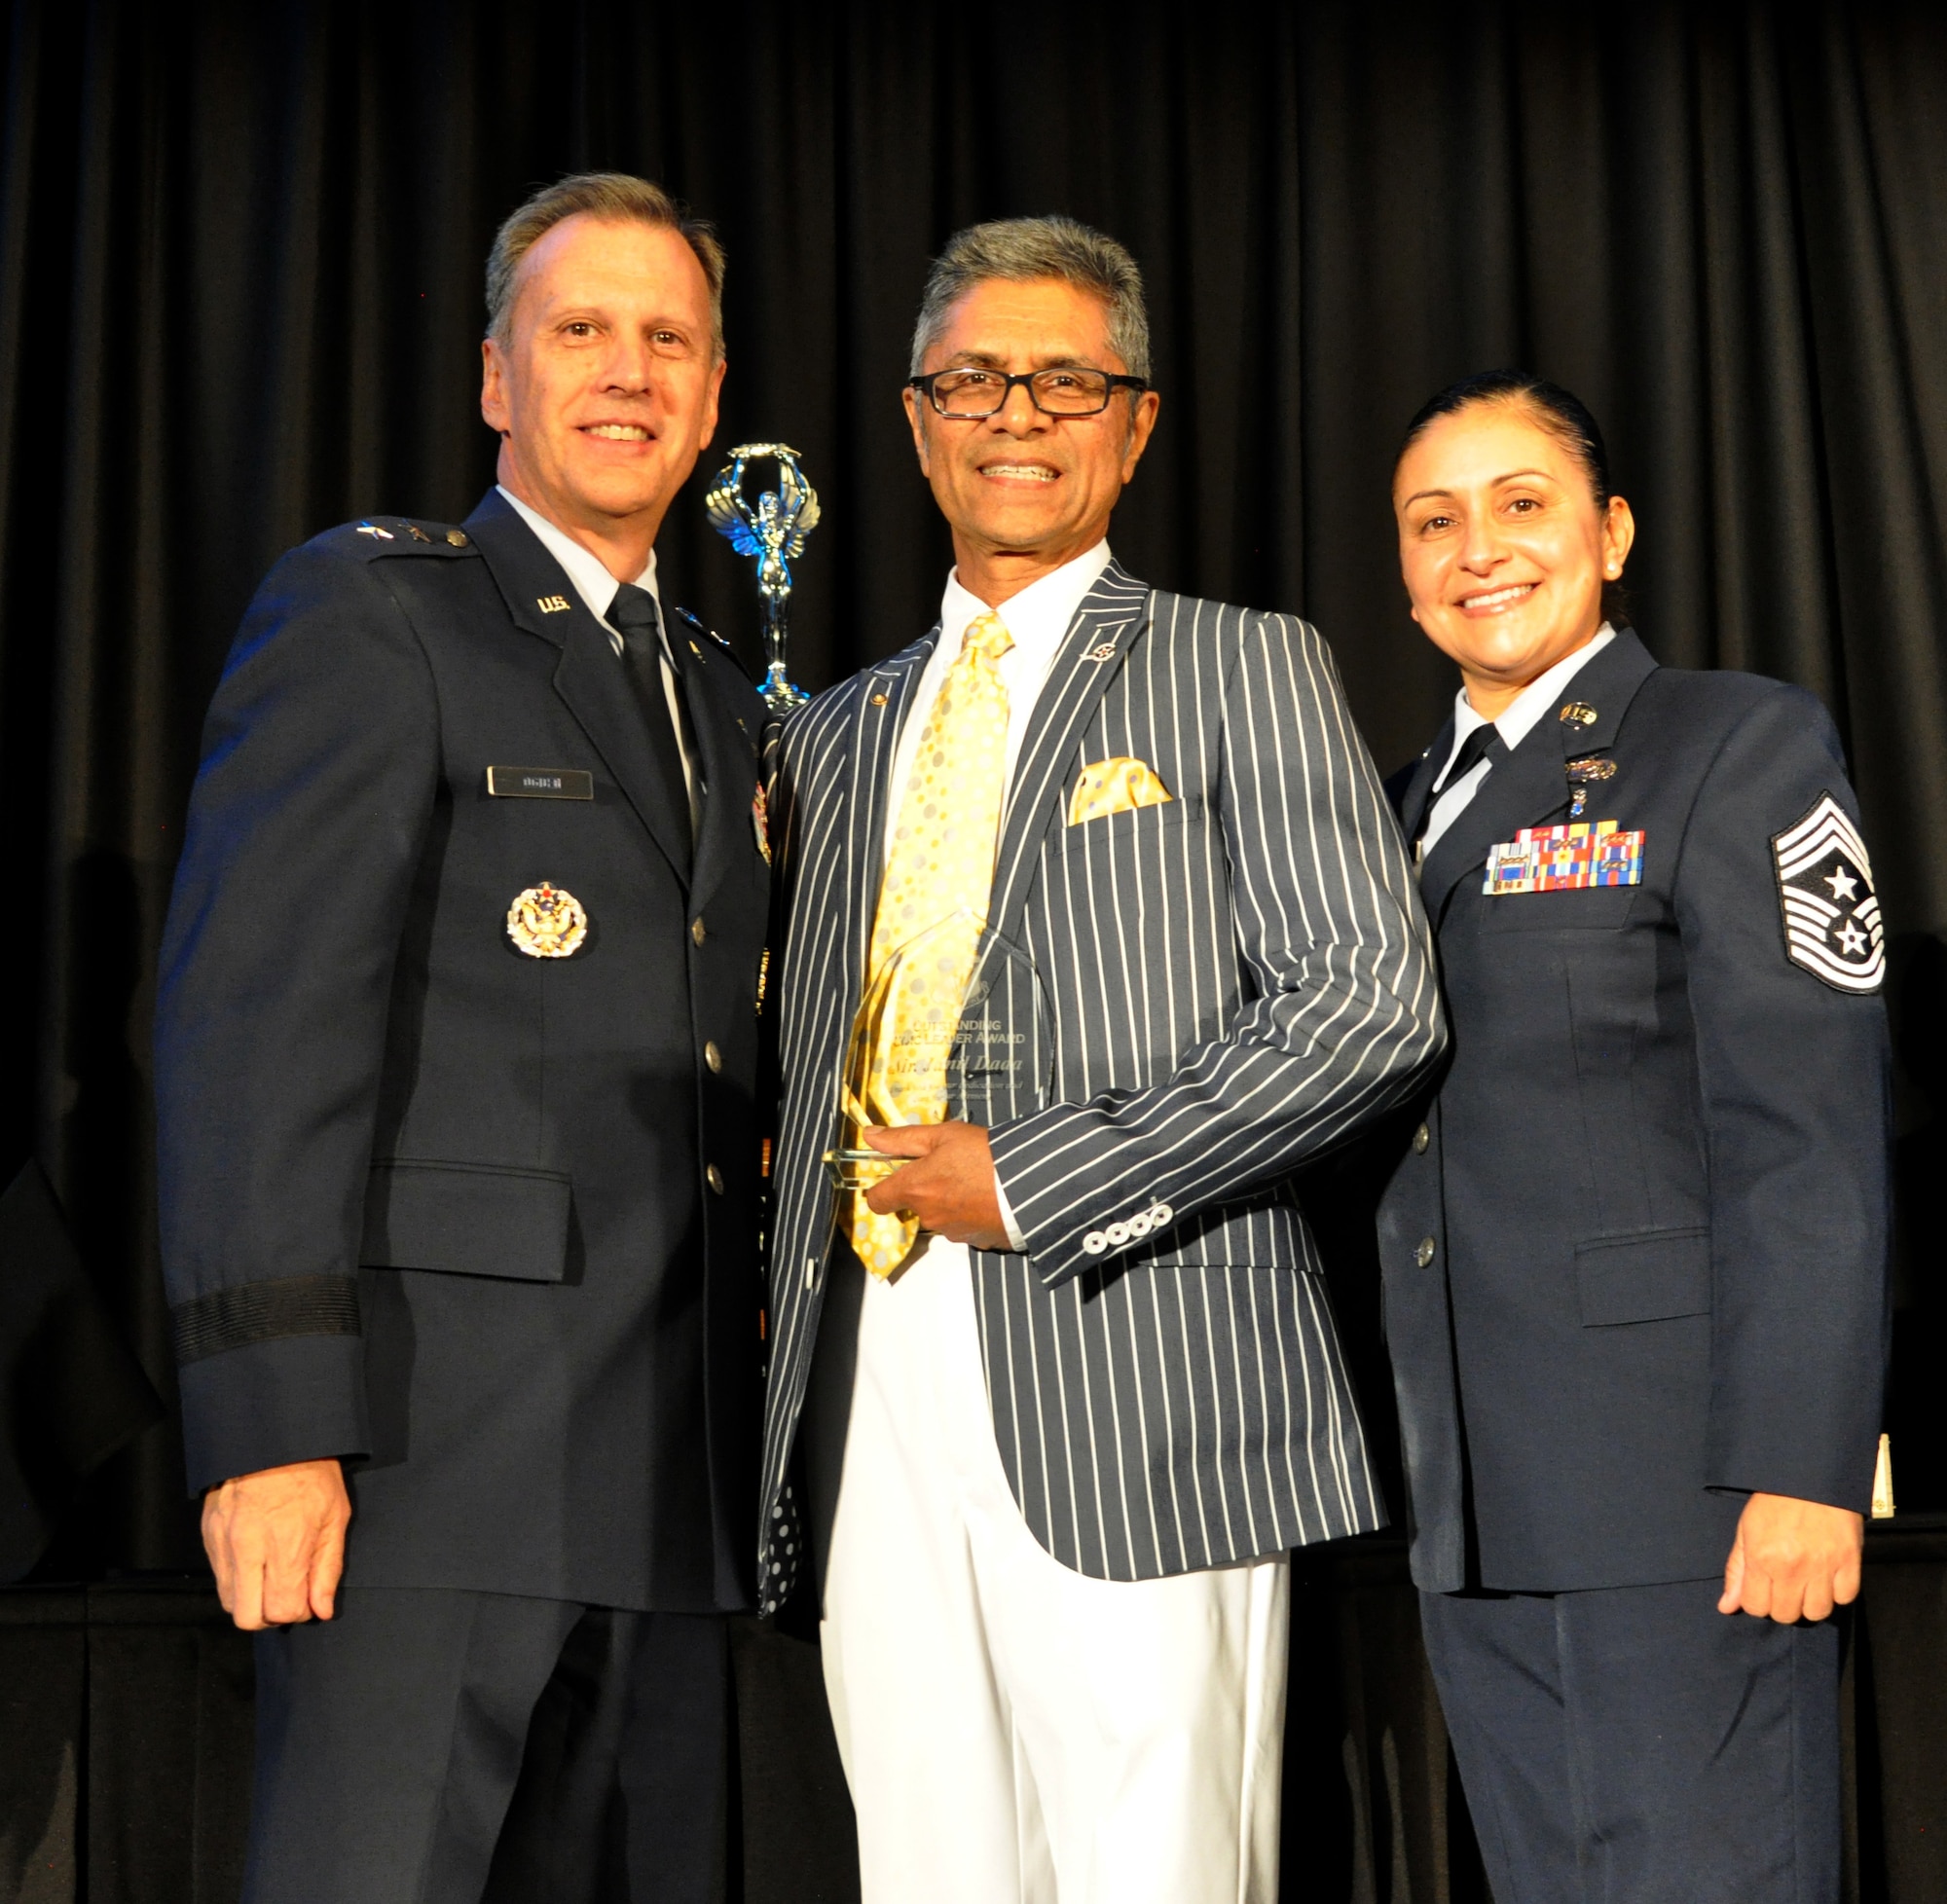 Mr. Jamil Dada received the inaugural Community Leader of the Year Award. Dada has served the Riverside community and March ARB for more than 30 years. He serves as President of the March Field Air Museum, which holds one of the largest collections of military aircraft on the West Coast. Additionally, he is the first resident of Riverside to serve on the Air Mobility Command’s Civic Leader Program at March Air Reserve Base. (U.S. Air Force photo by Candy Knight)